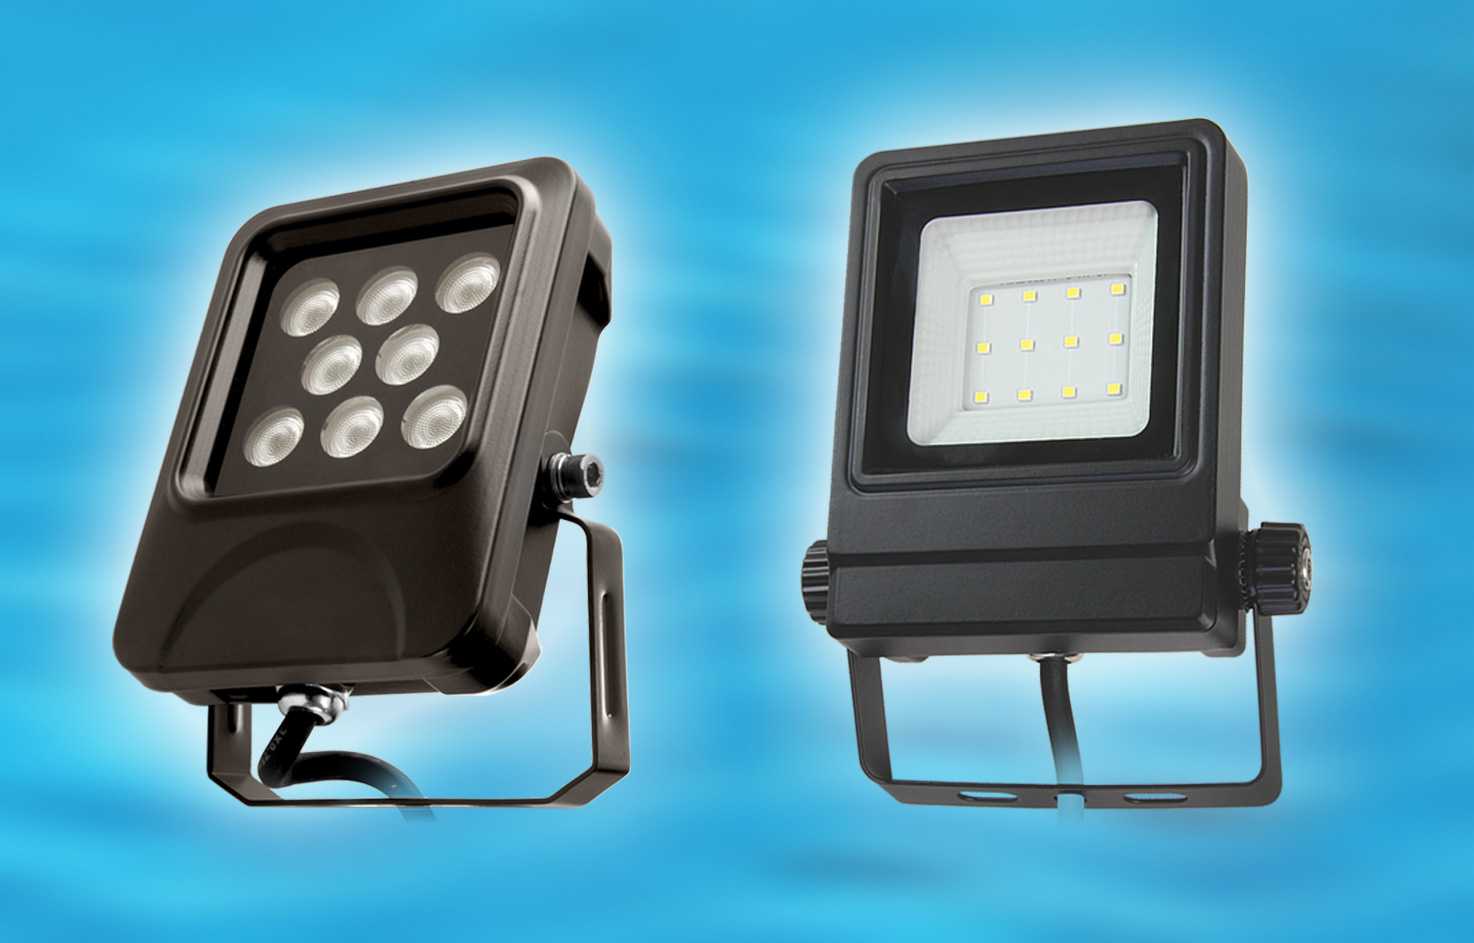 The floodlights are IP65 rated